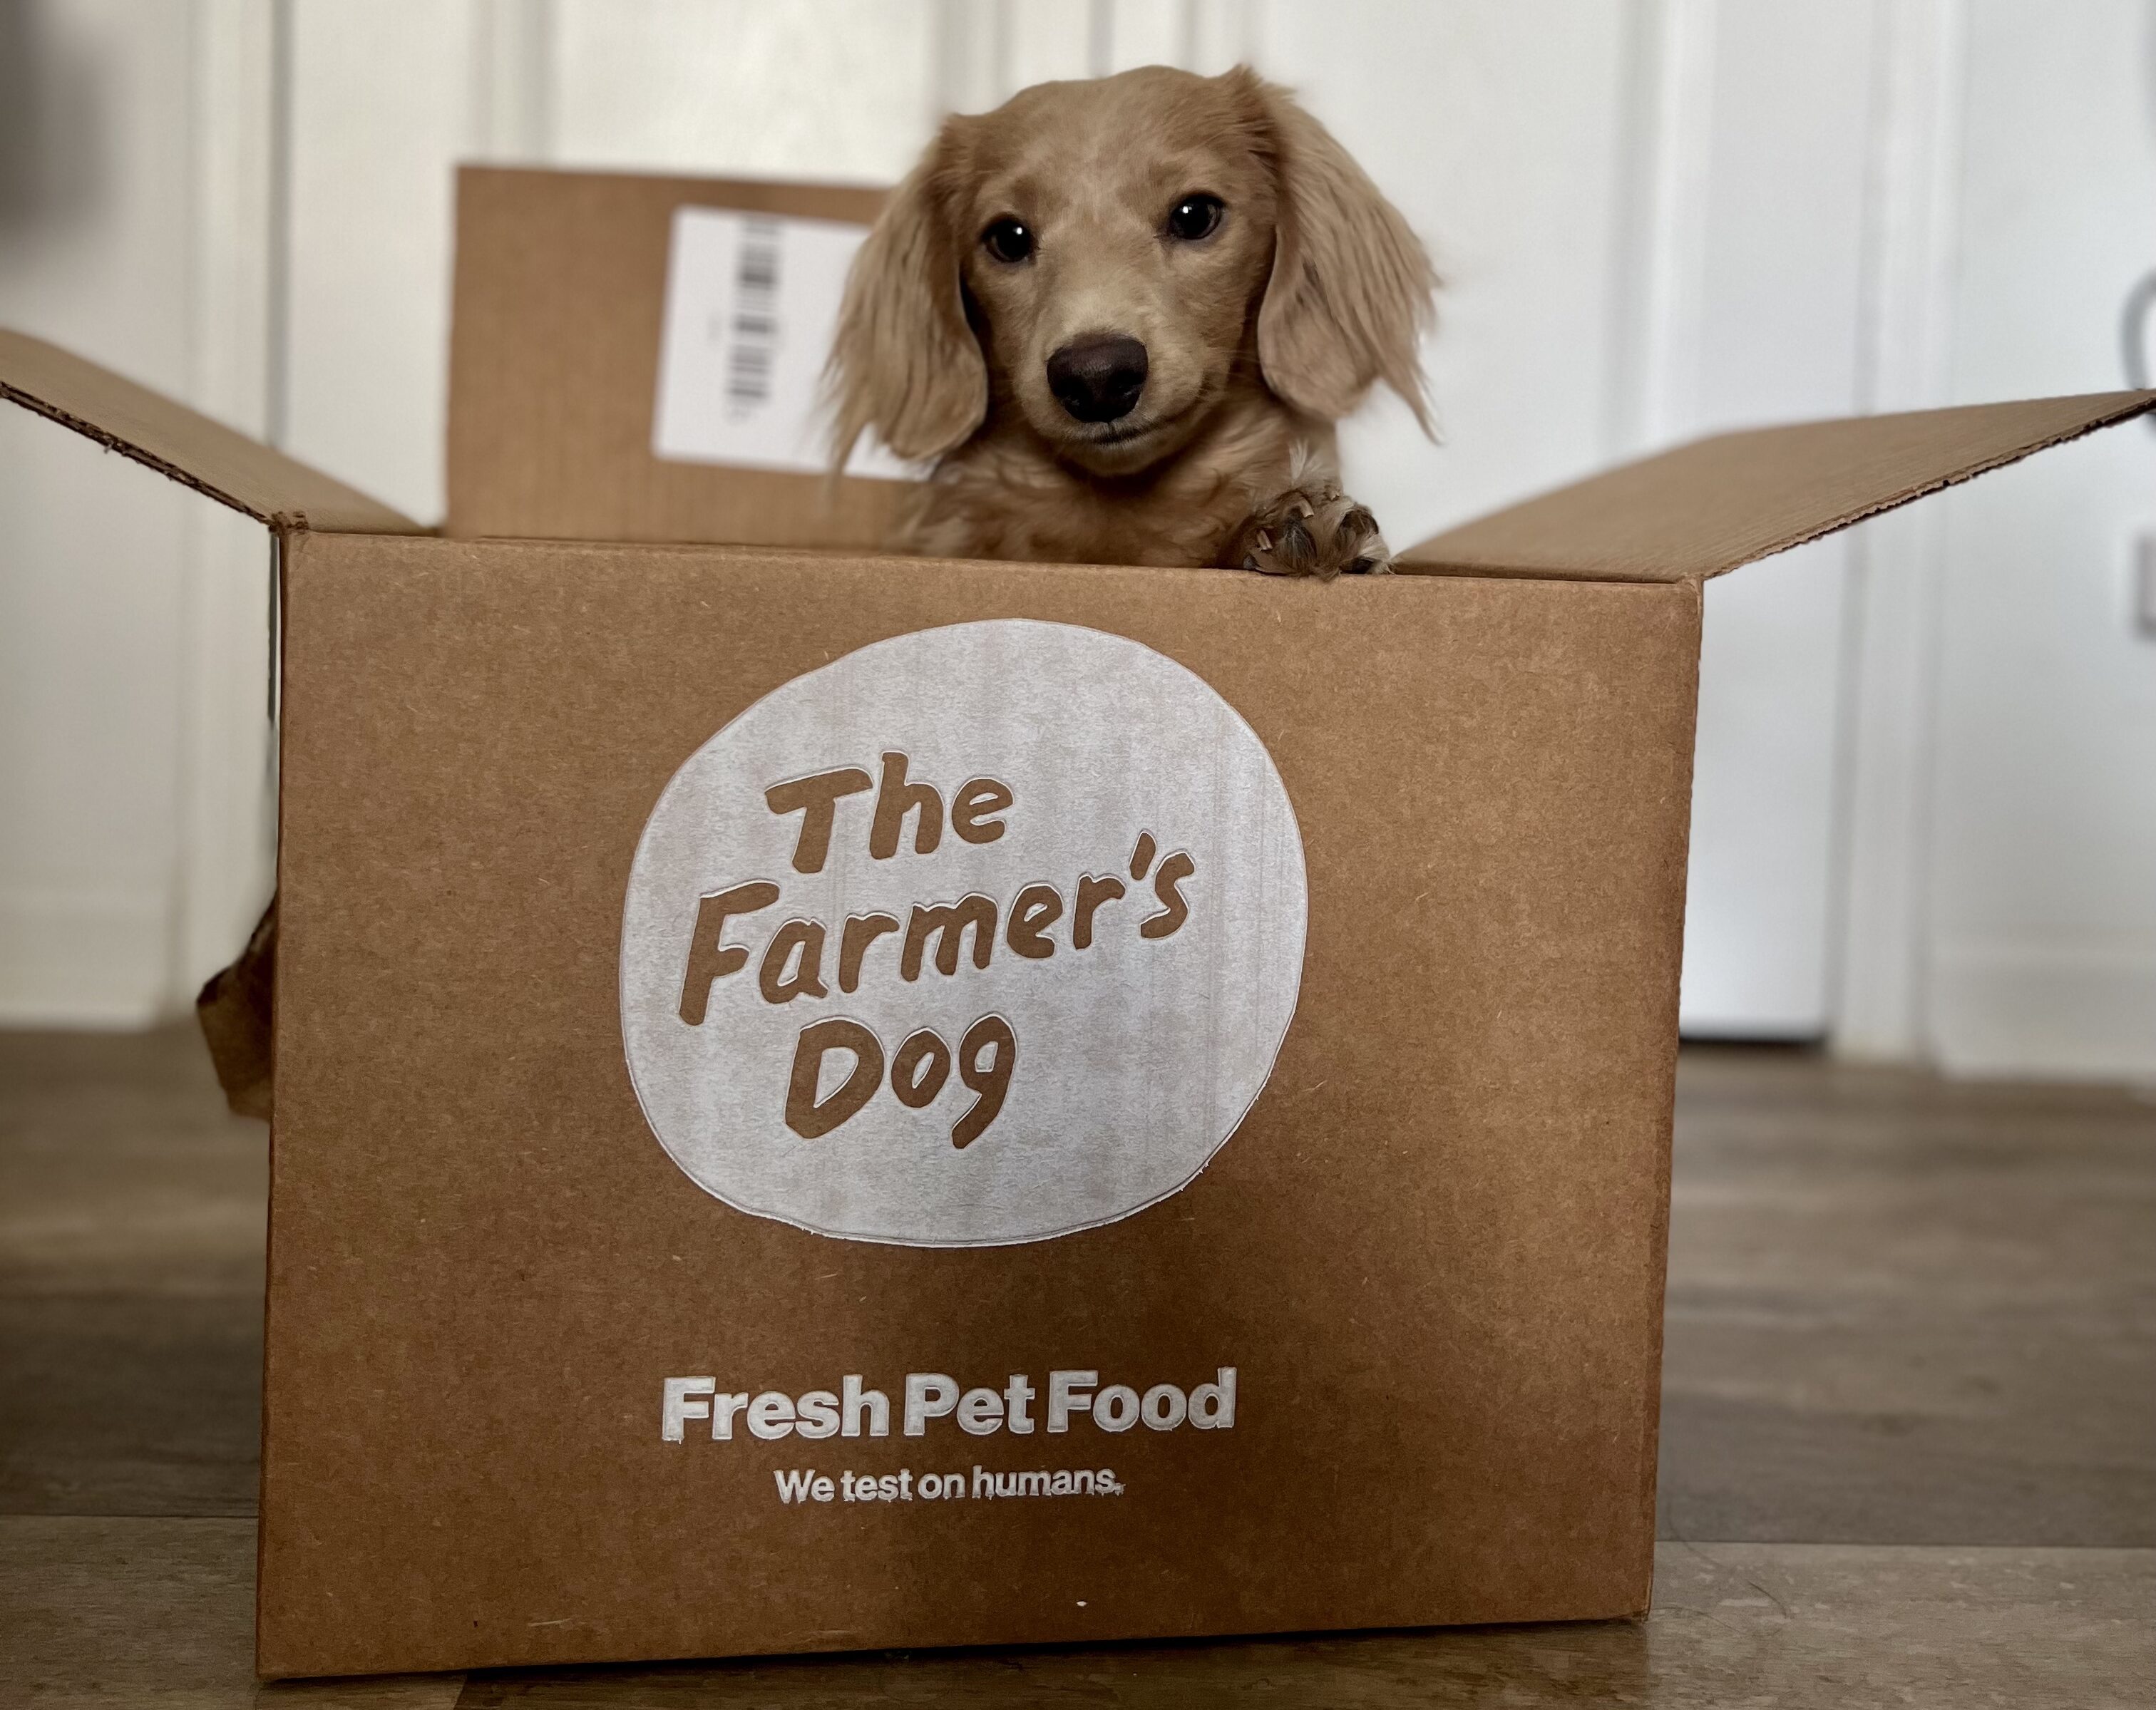 5 Things I Wish I Knew About My Dog’s Food & Why I Made the Switch